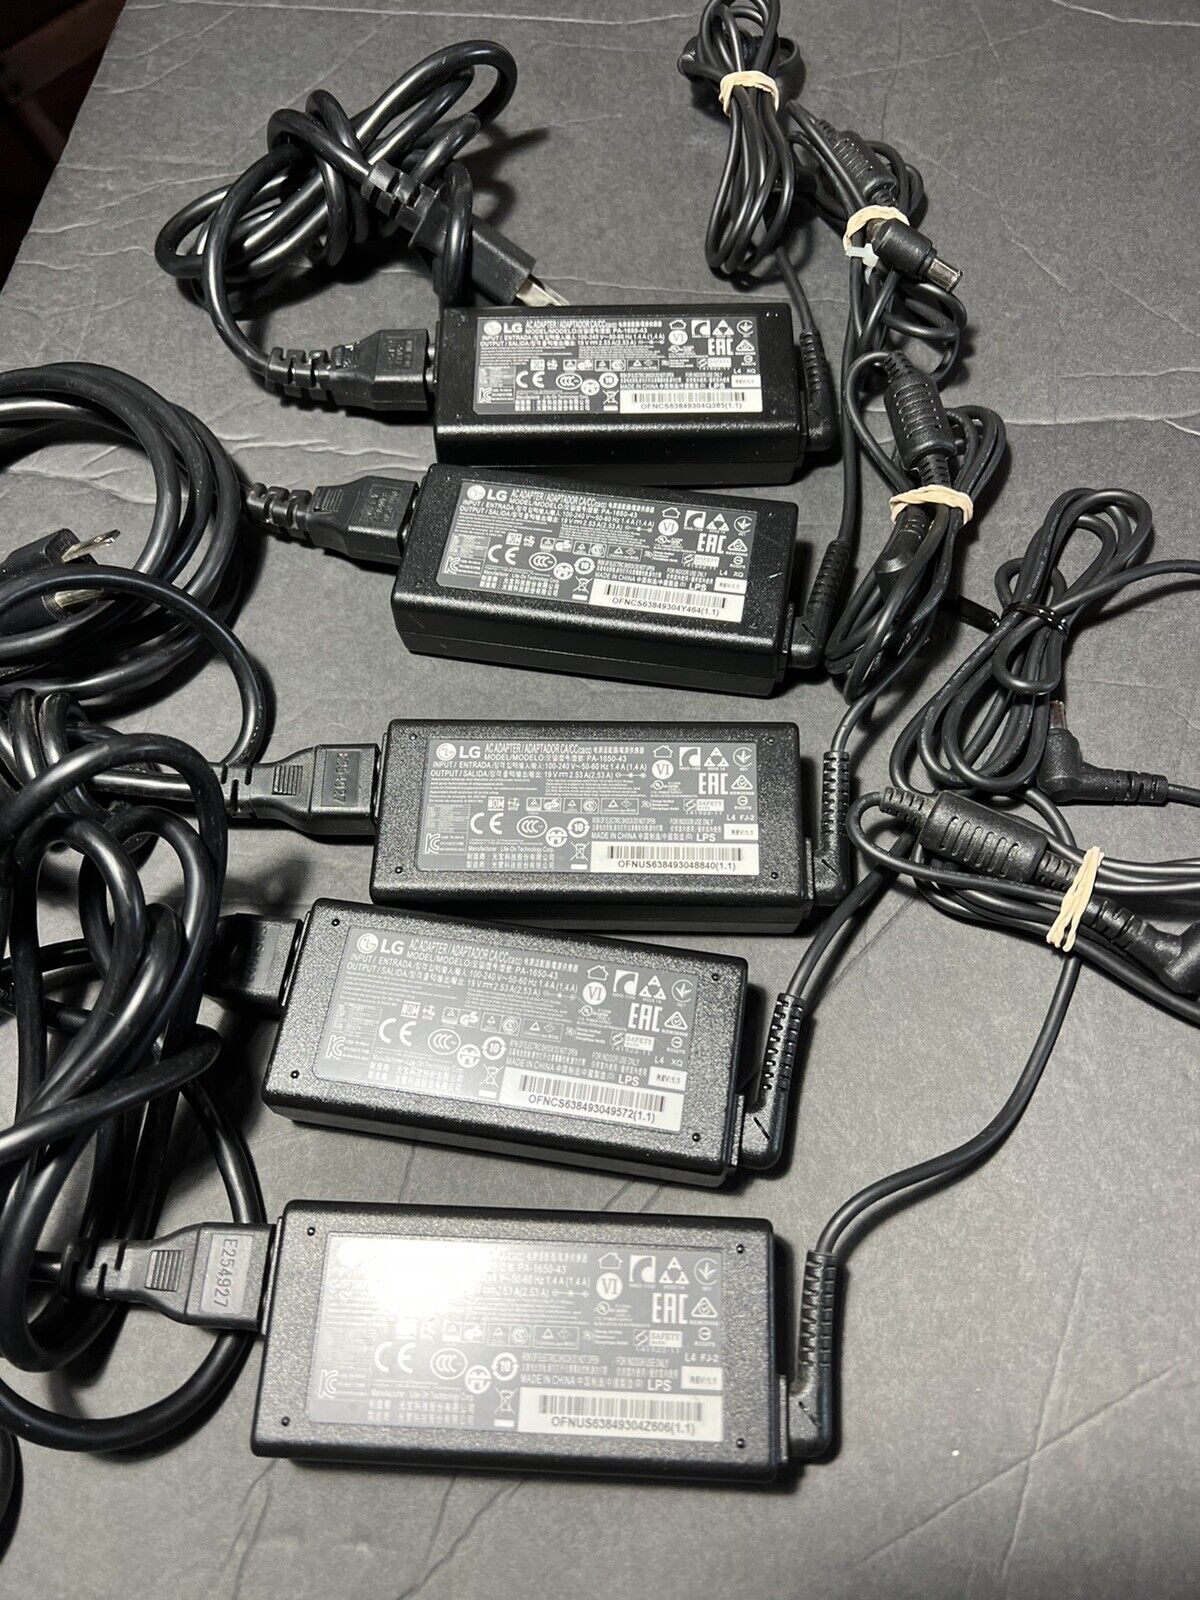 Lot of 5 Genuine OEM PA-1650-43 LG AC Adapter Power Supply Cord 19V 2.53A 